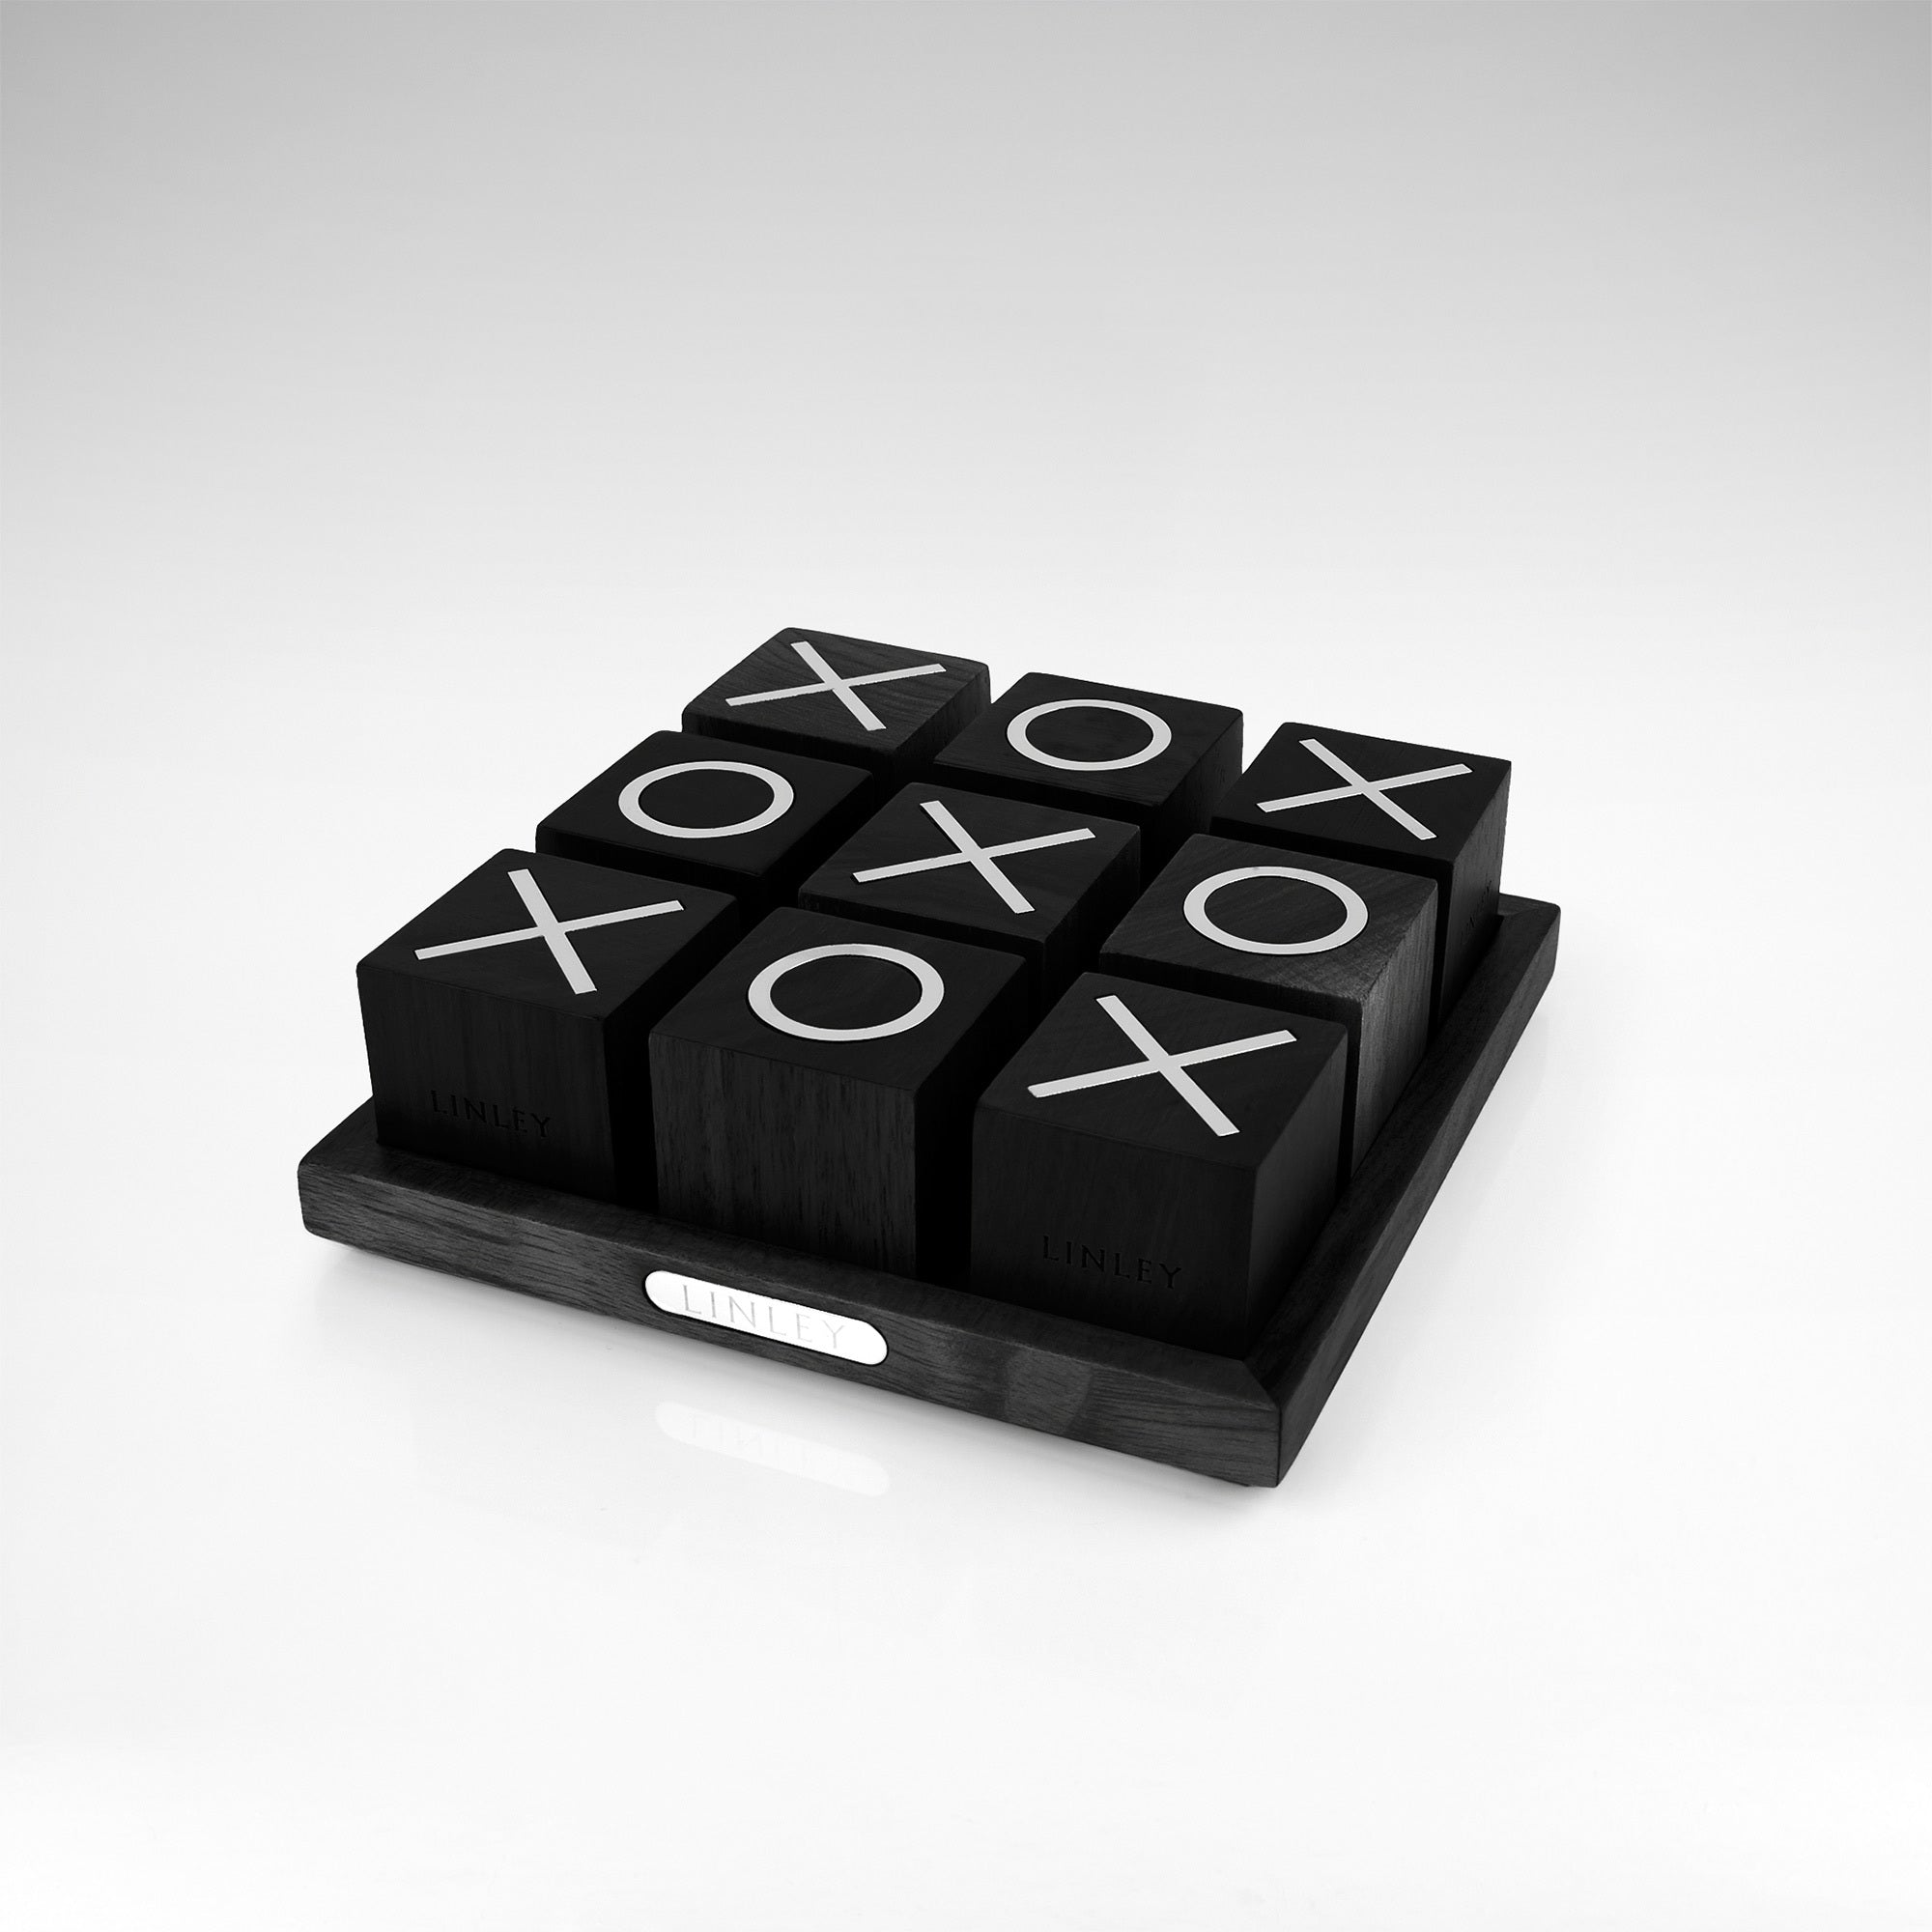 Noughts & Crosses Game | Luxury Home Accessories & Gifts | LINLEY